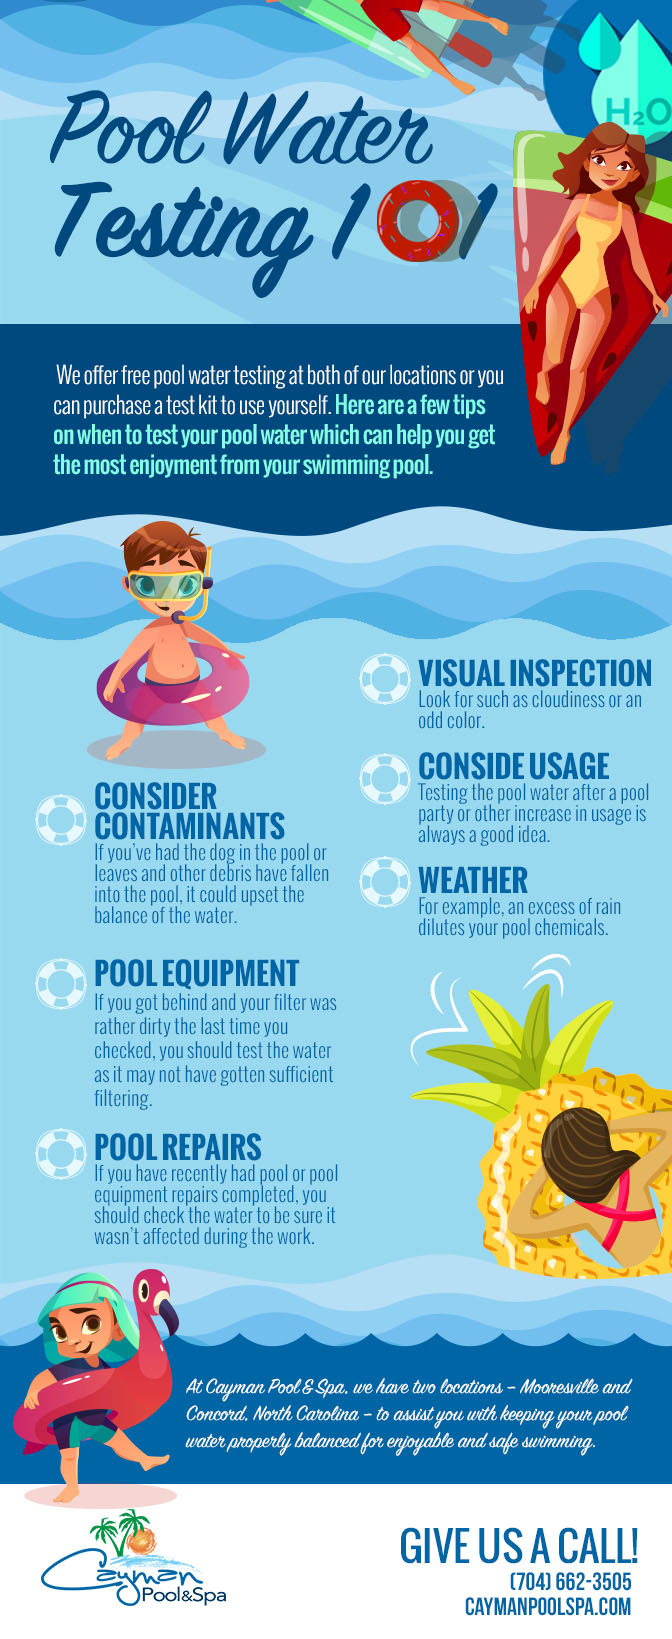 Pool Water Testing 101 [infographic]